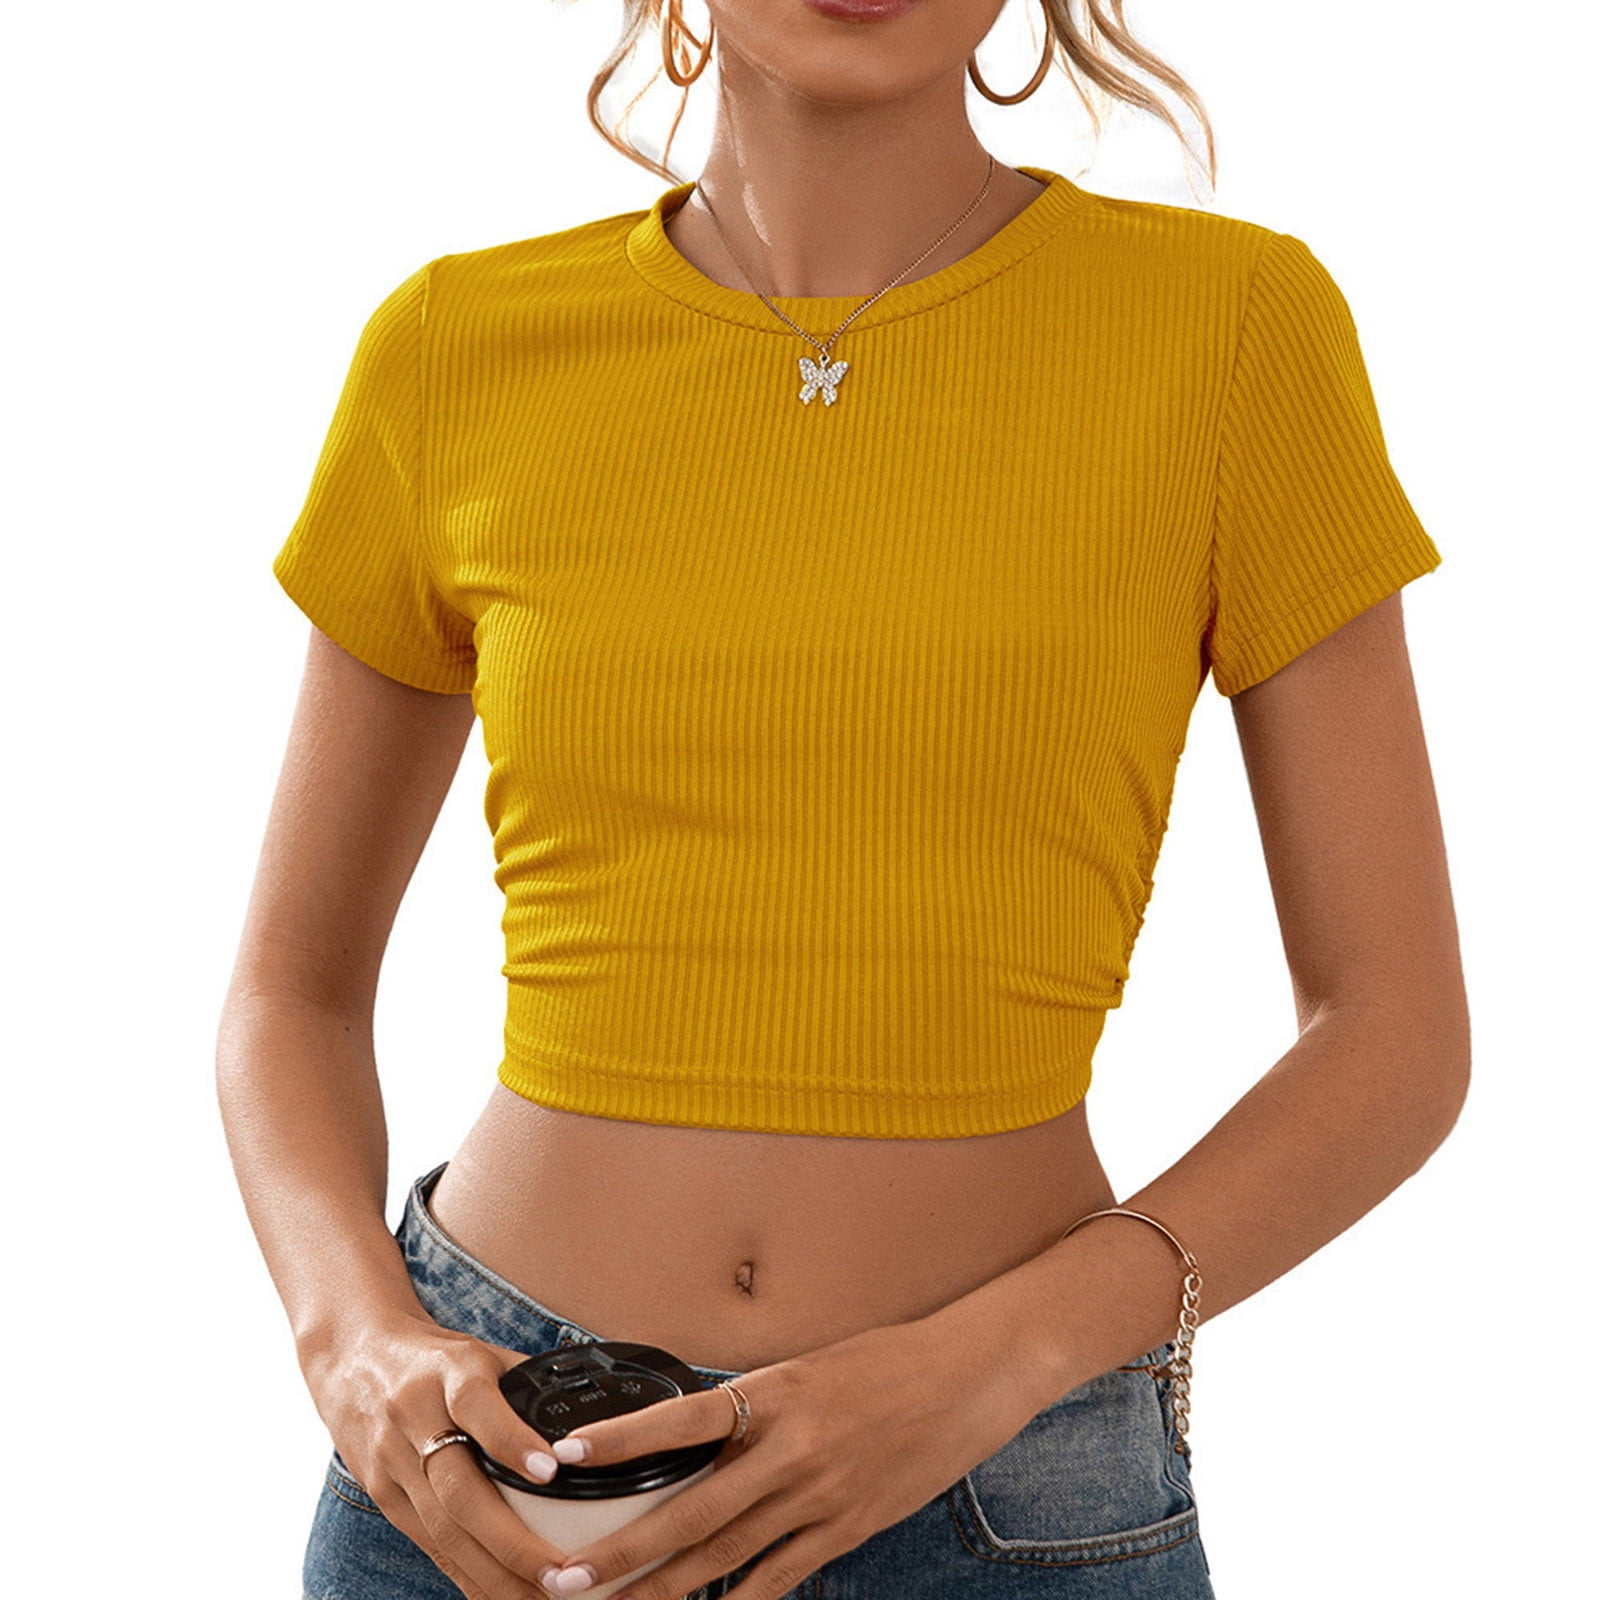 RQYYD Discount Women\'s Short Top Tee Shirts Solid Casual Summer T-Shirt(Yellow,M) Crewneck Workout Basic Slim Fit Teen Ribbed Knit Blouse Sleeve Crop